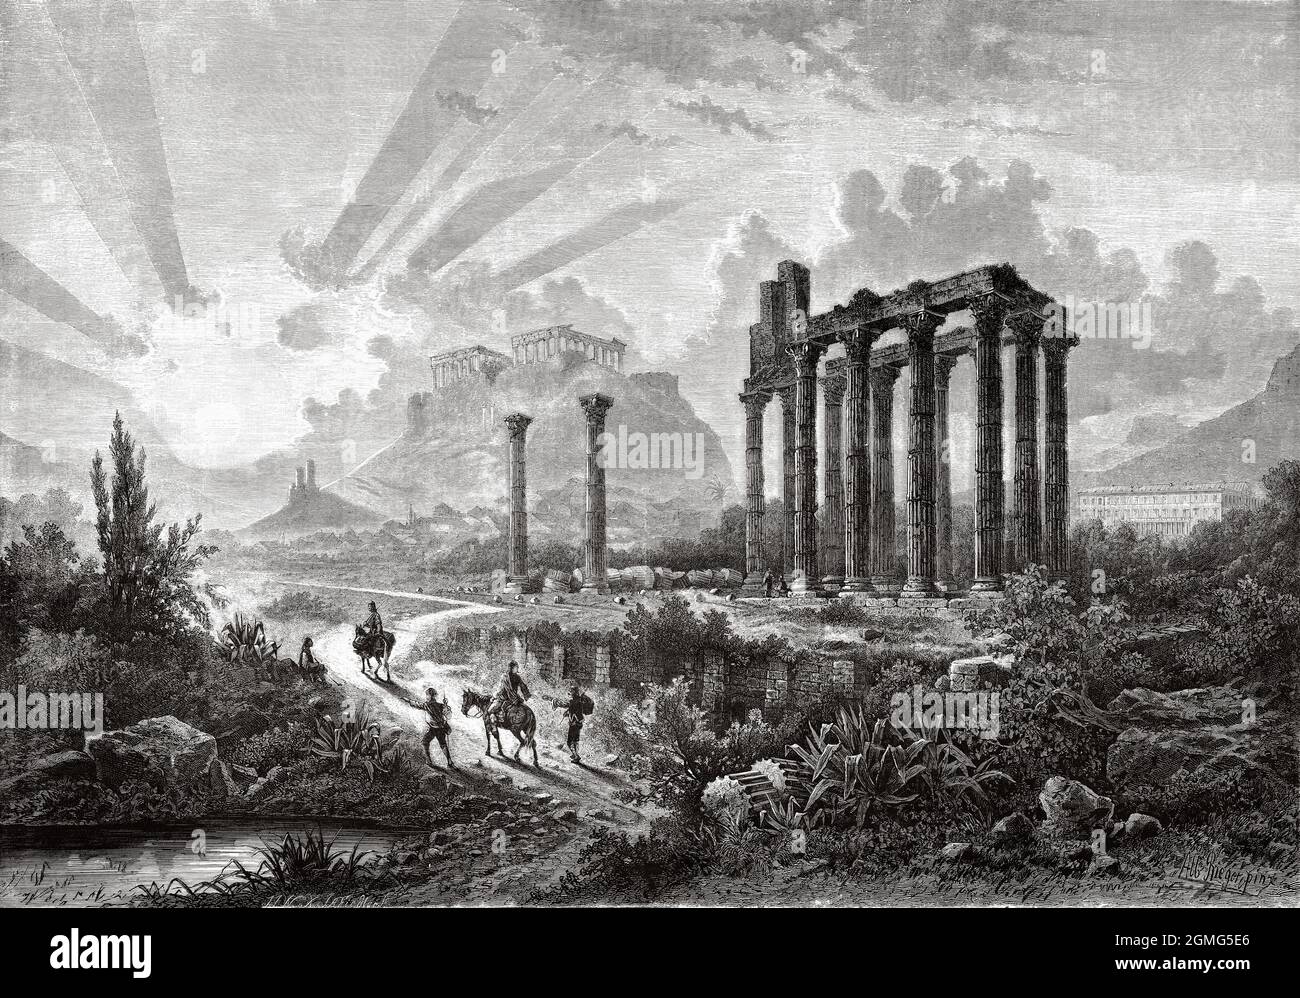 Ruins of Athens from The Temple of Olympian Jupiter, painting by Albert Rieger (1834-1905) Old 19th century engraved illustration from La Ilustración Artística 1882 Stock Photo